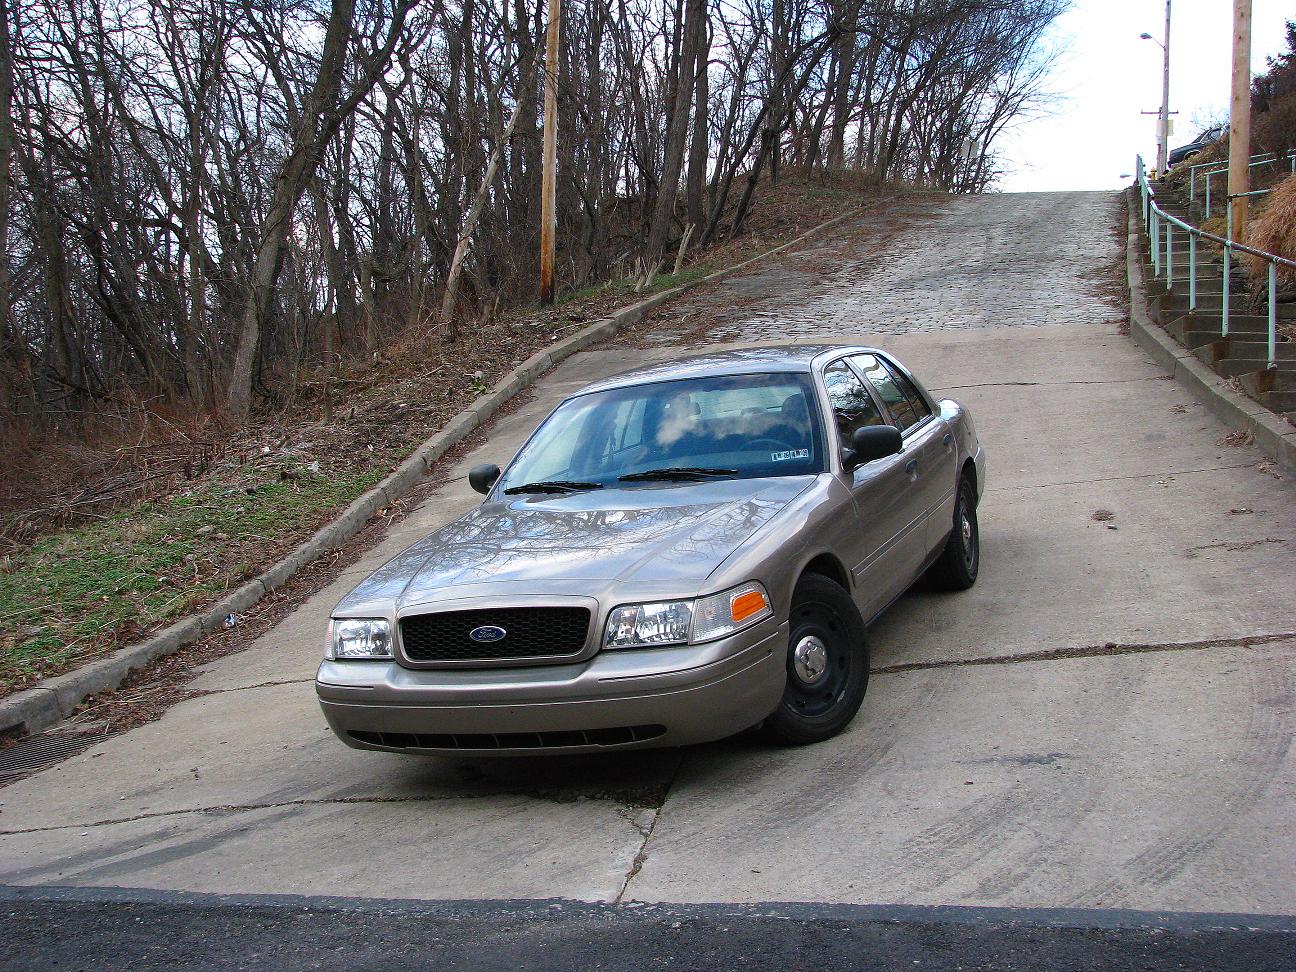  2004 Ford Crown Victoria Base